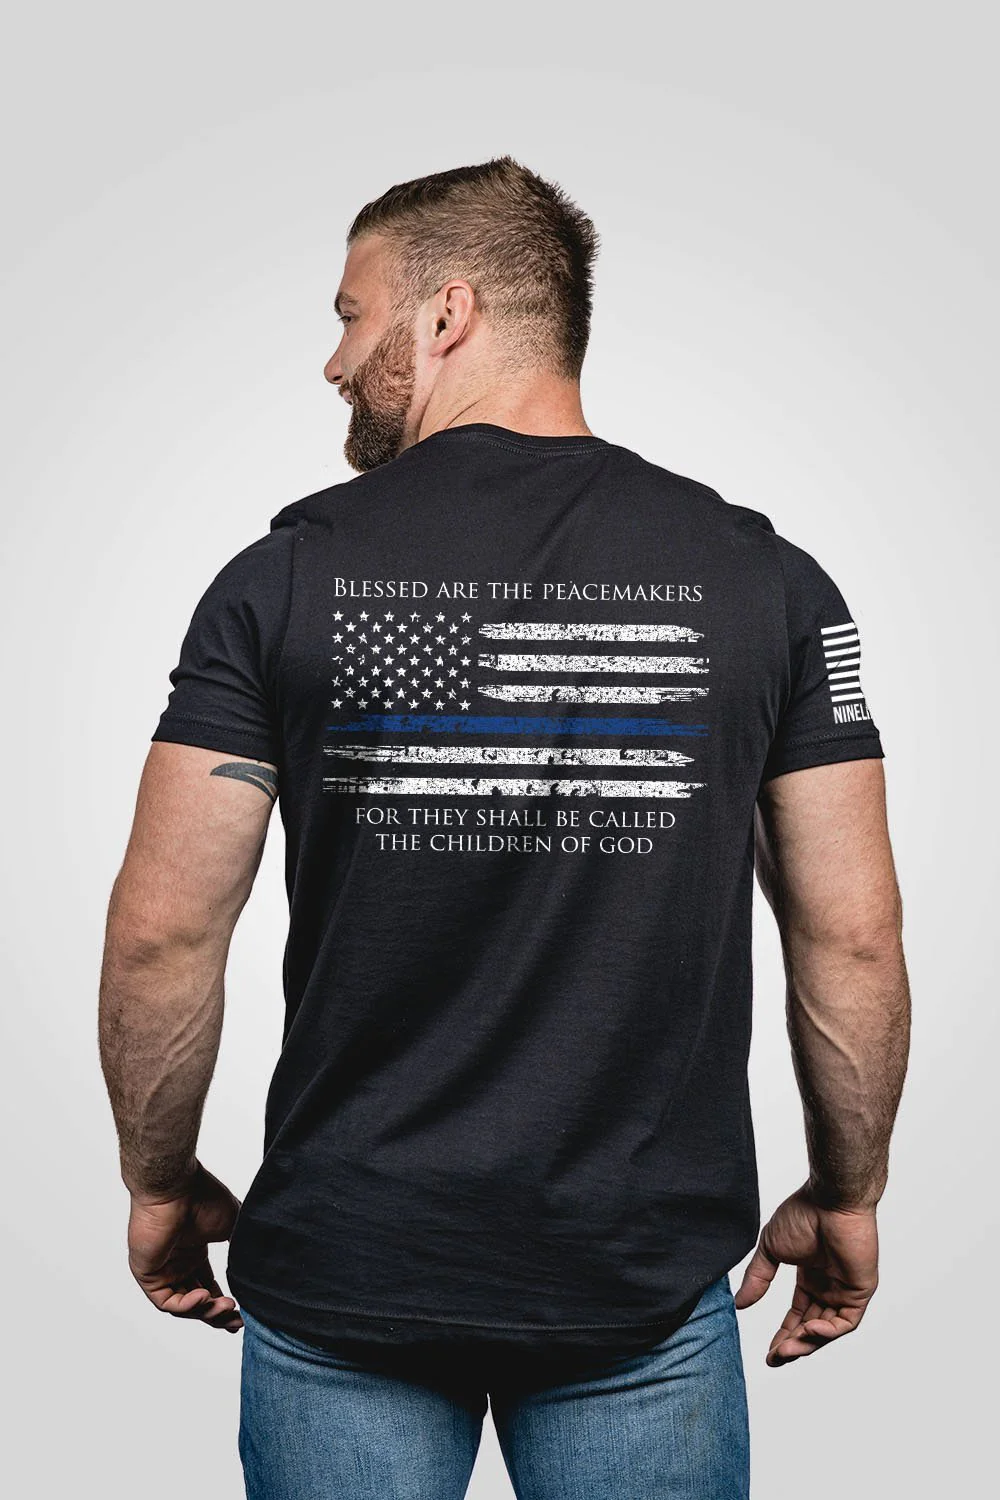 Nine Line Men's Thin Blue Line T-Shirt posted by ProdOrigin USA in Men's Apparel